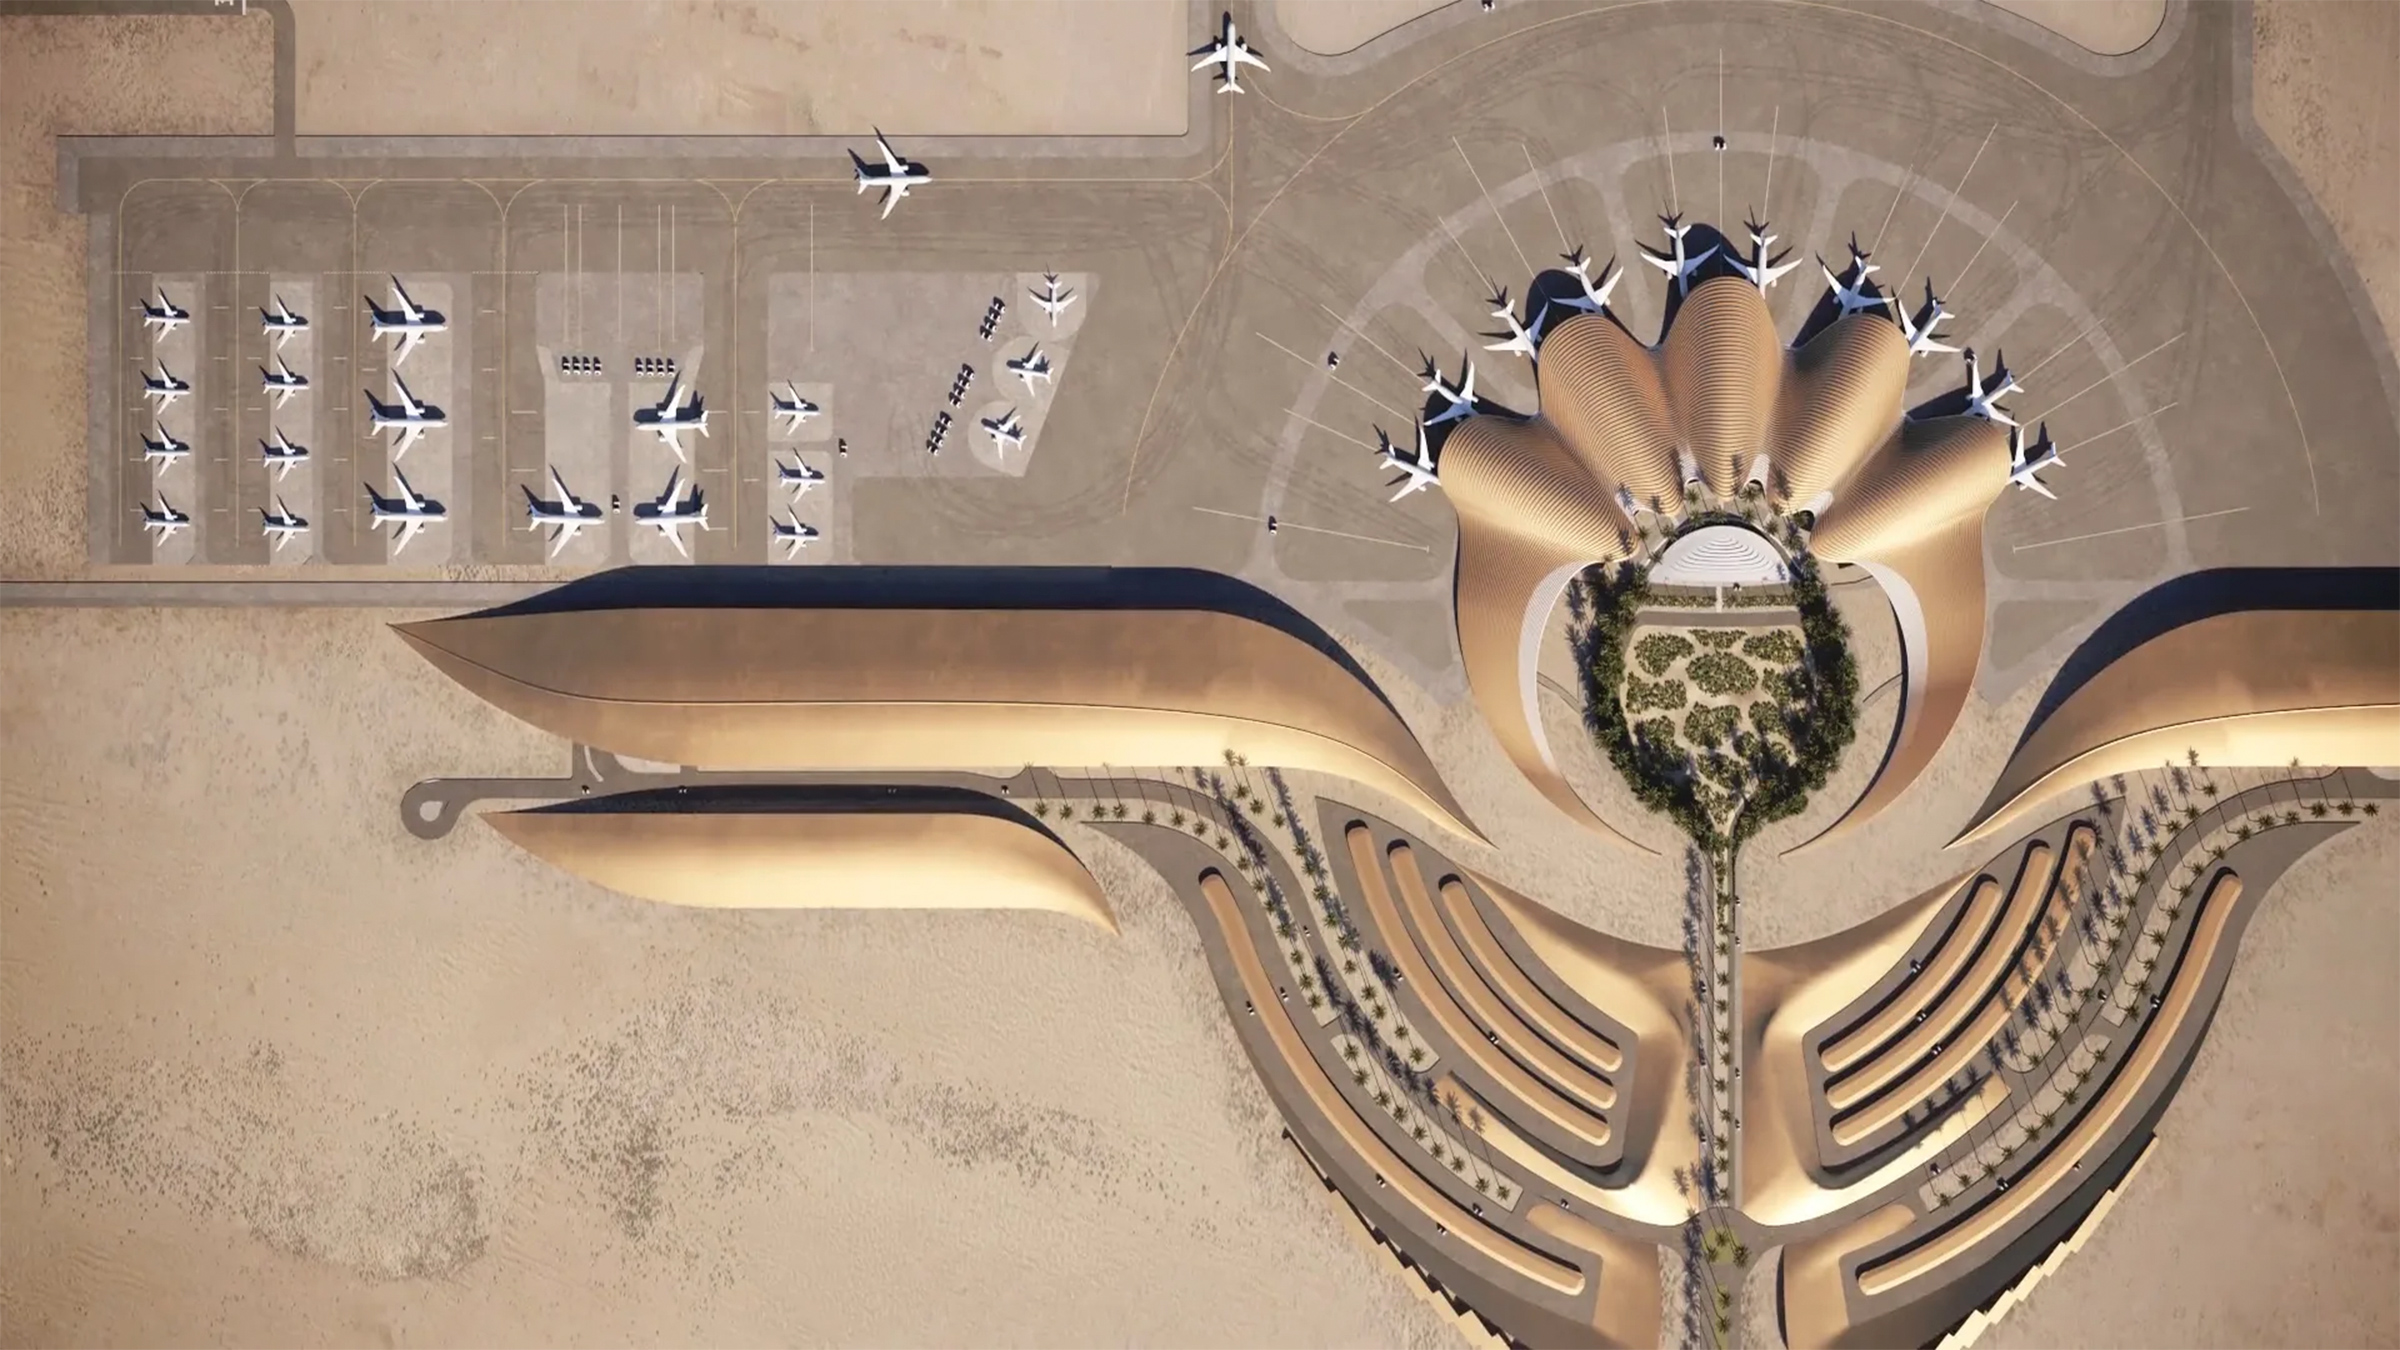 The Red Sea International Airport